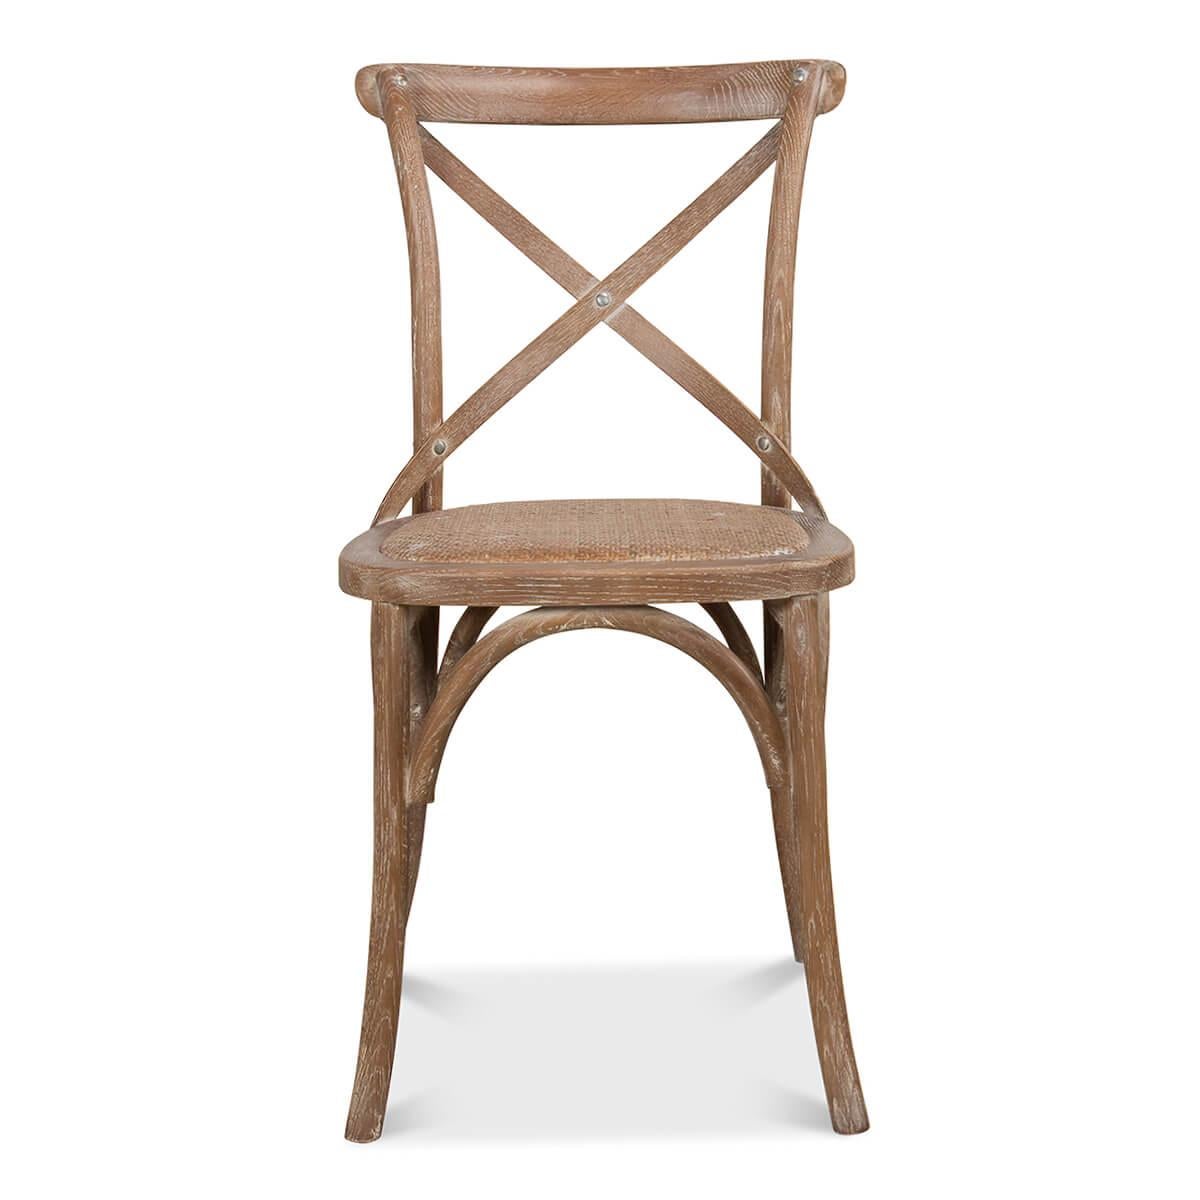 A French bistro-style whitewashed oak bentwood dining chair, with a padded woven caned seat.

Dimensions: 20